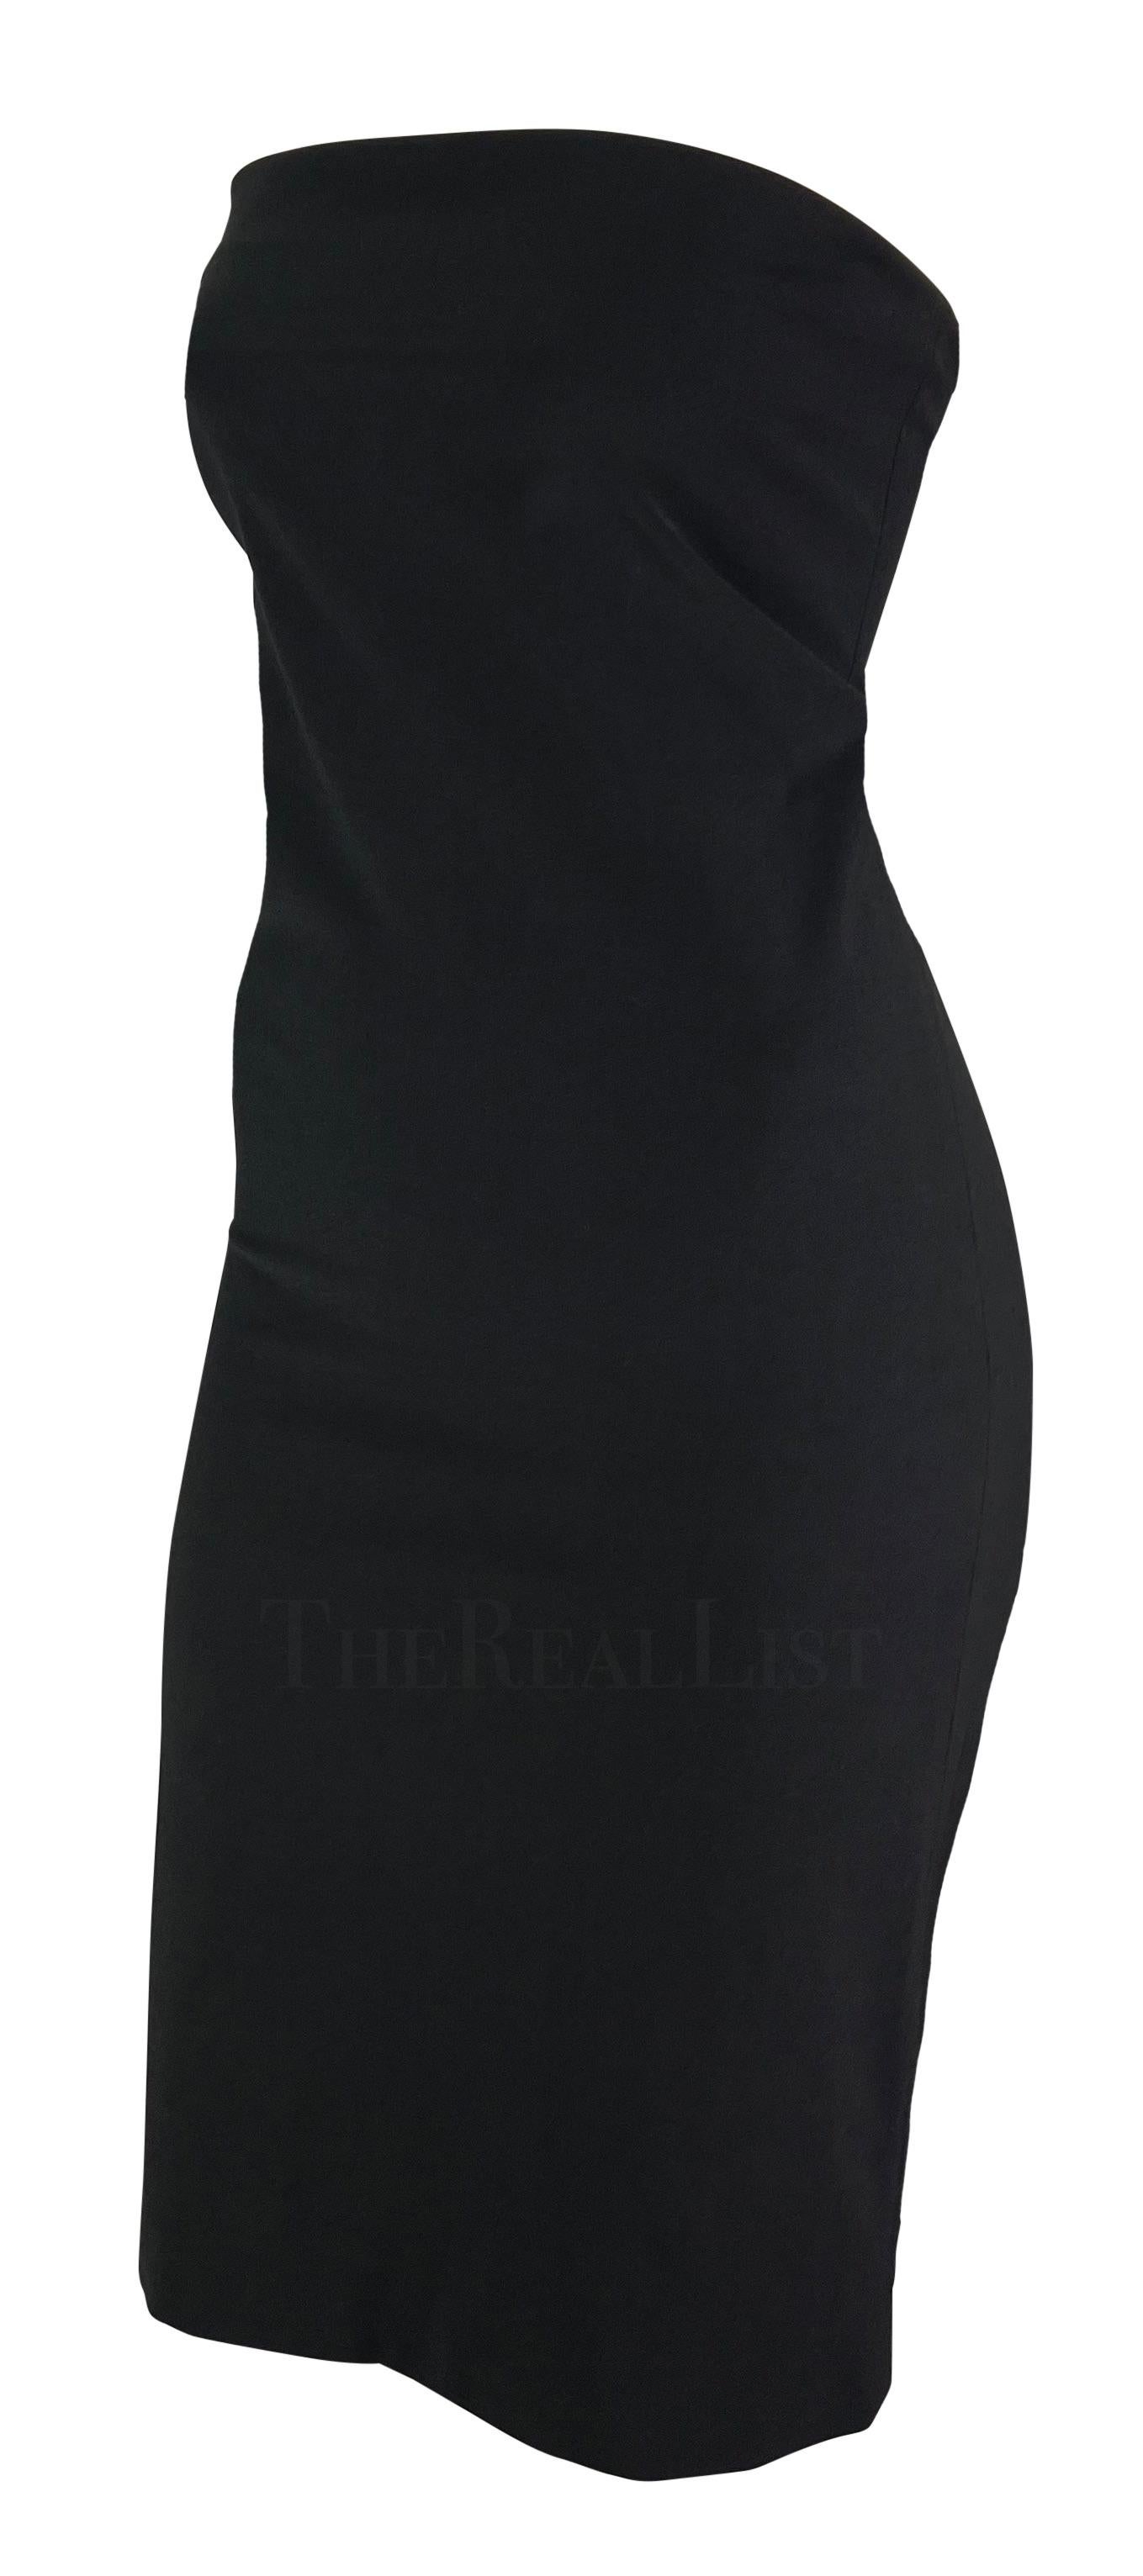 S/S 1997 Tom Ford Gucci by Tom Ford Black Strapless Bodycon Mini Dress  Excellent état - En vente à West Hollywood, CA